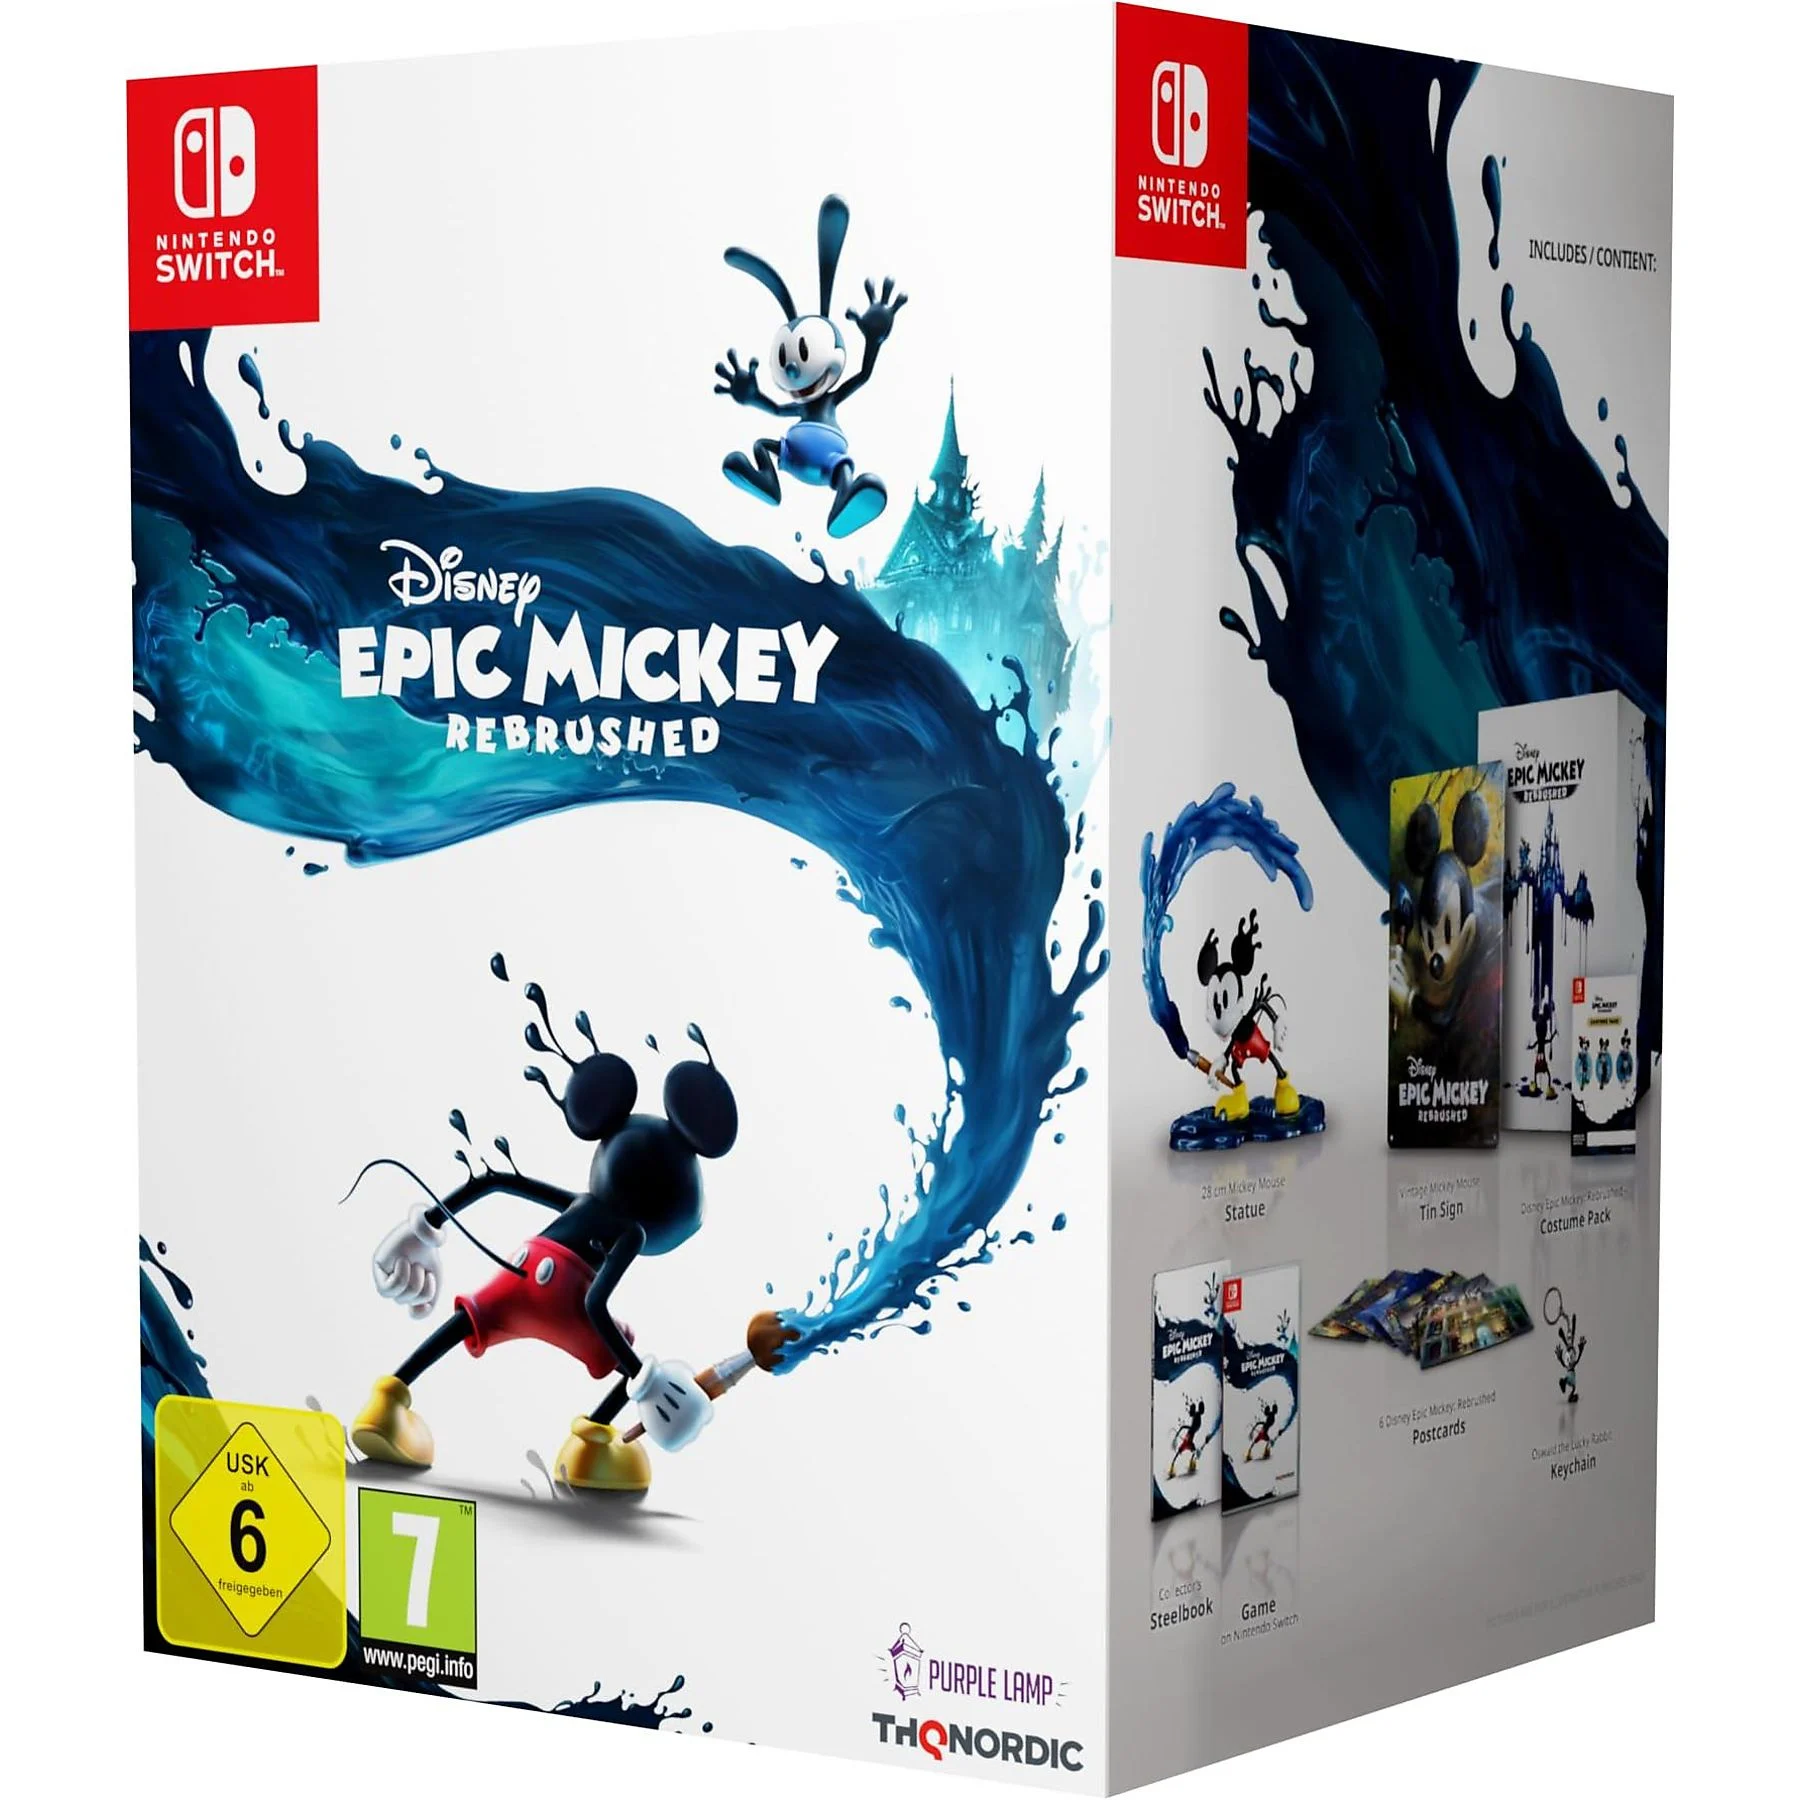 Disney Epic Mickey: Rebrushed - Collector's Edition - [Nintendo Switch]